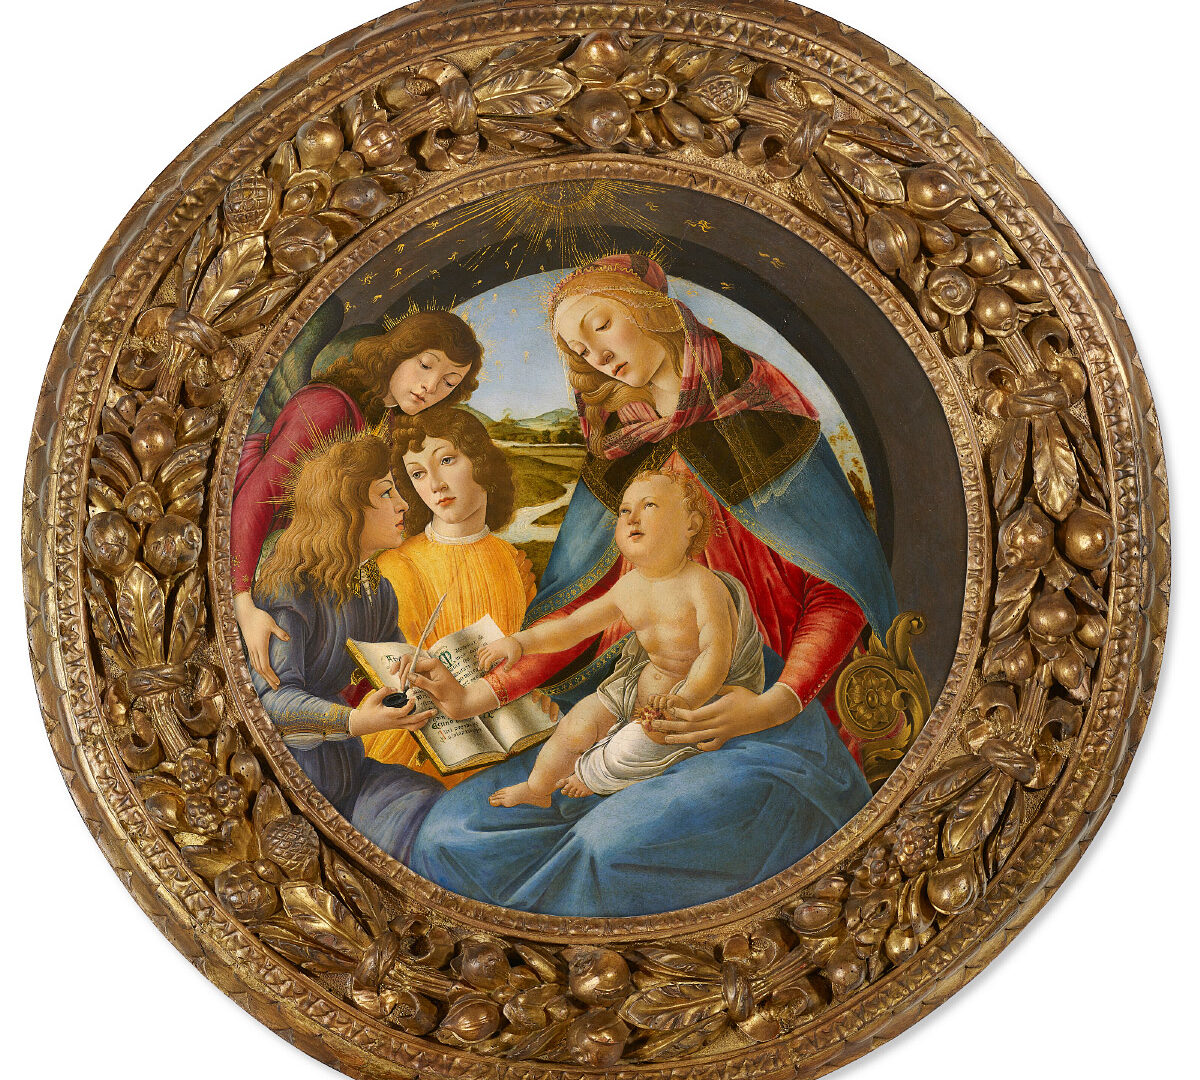 Painting of Madonna and Jesus surrounded by angels in an ornate gold frame